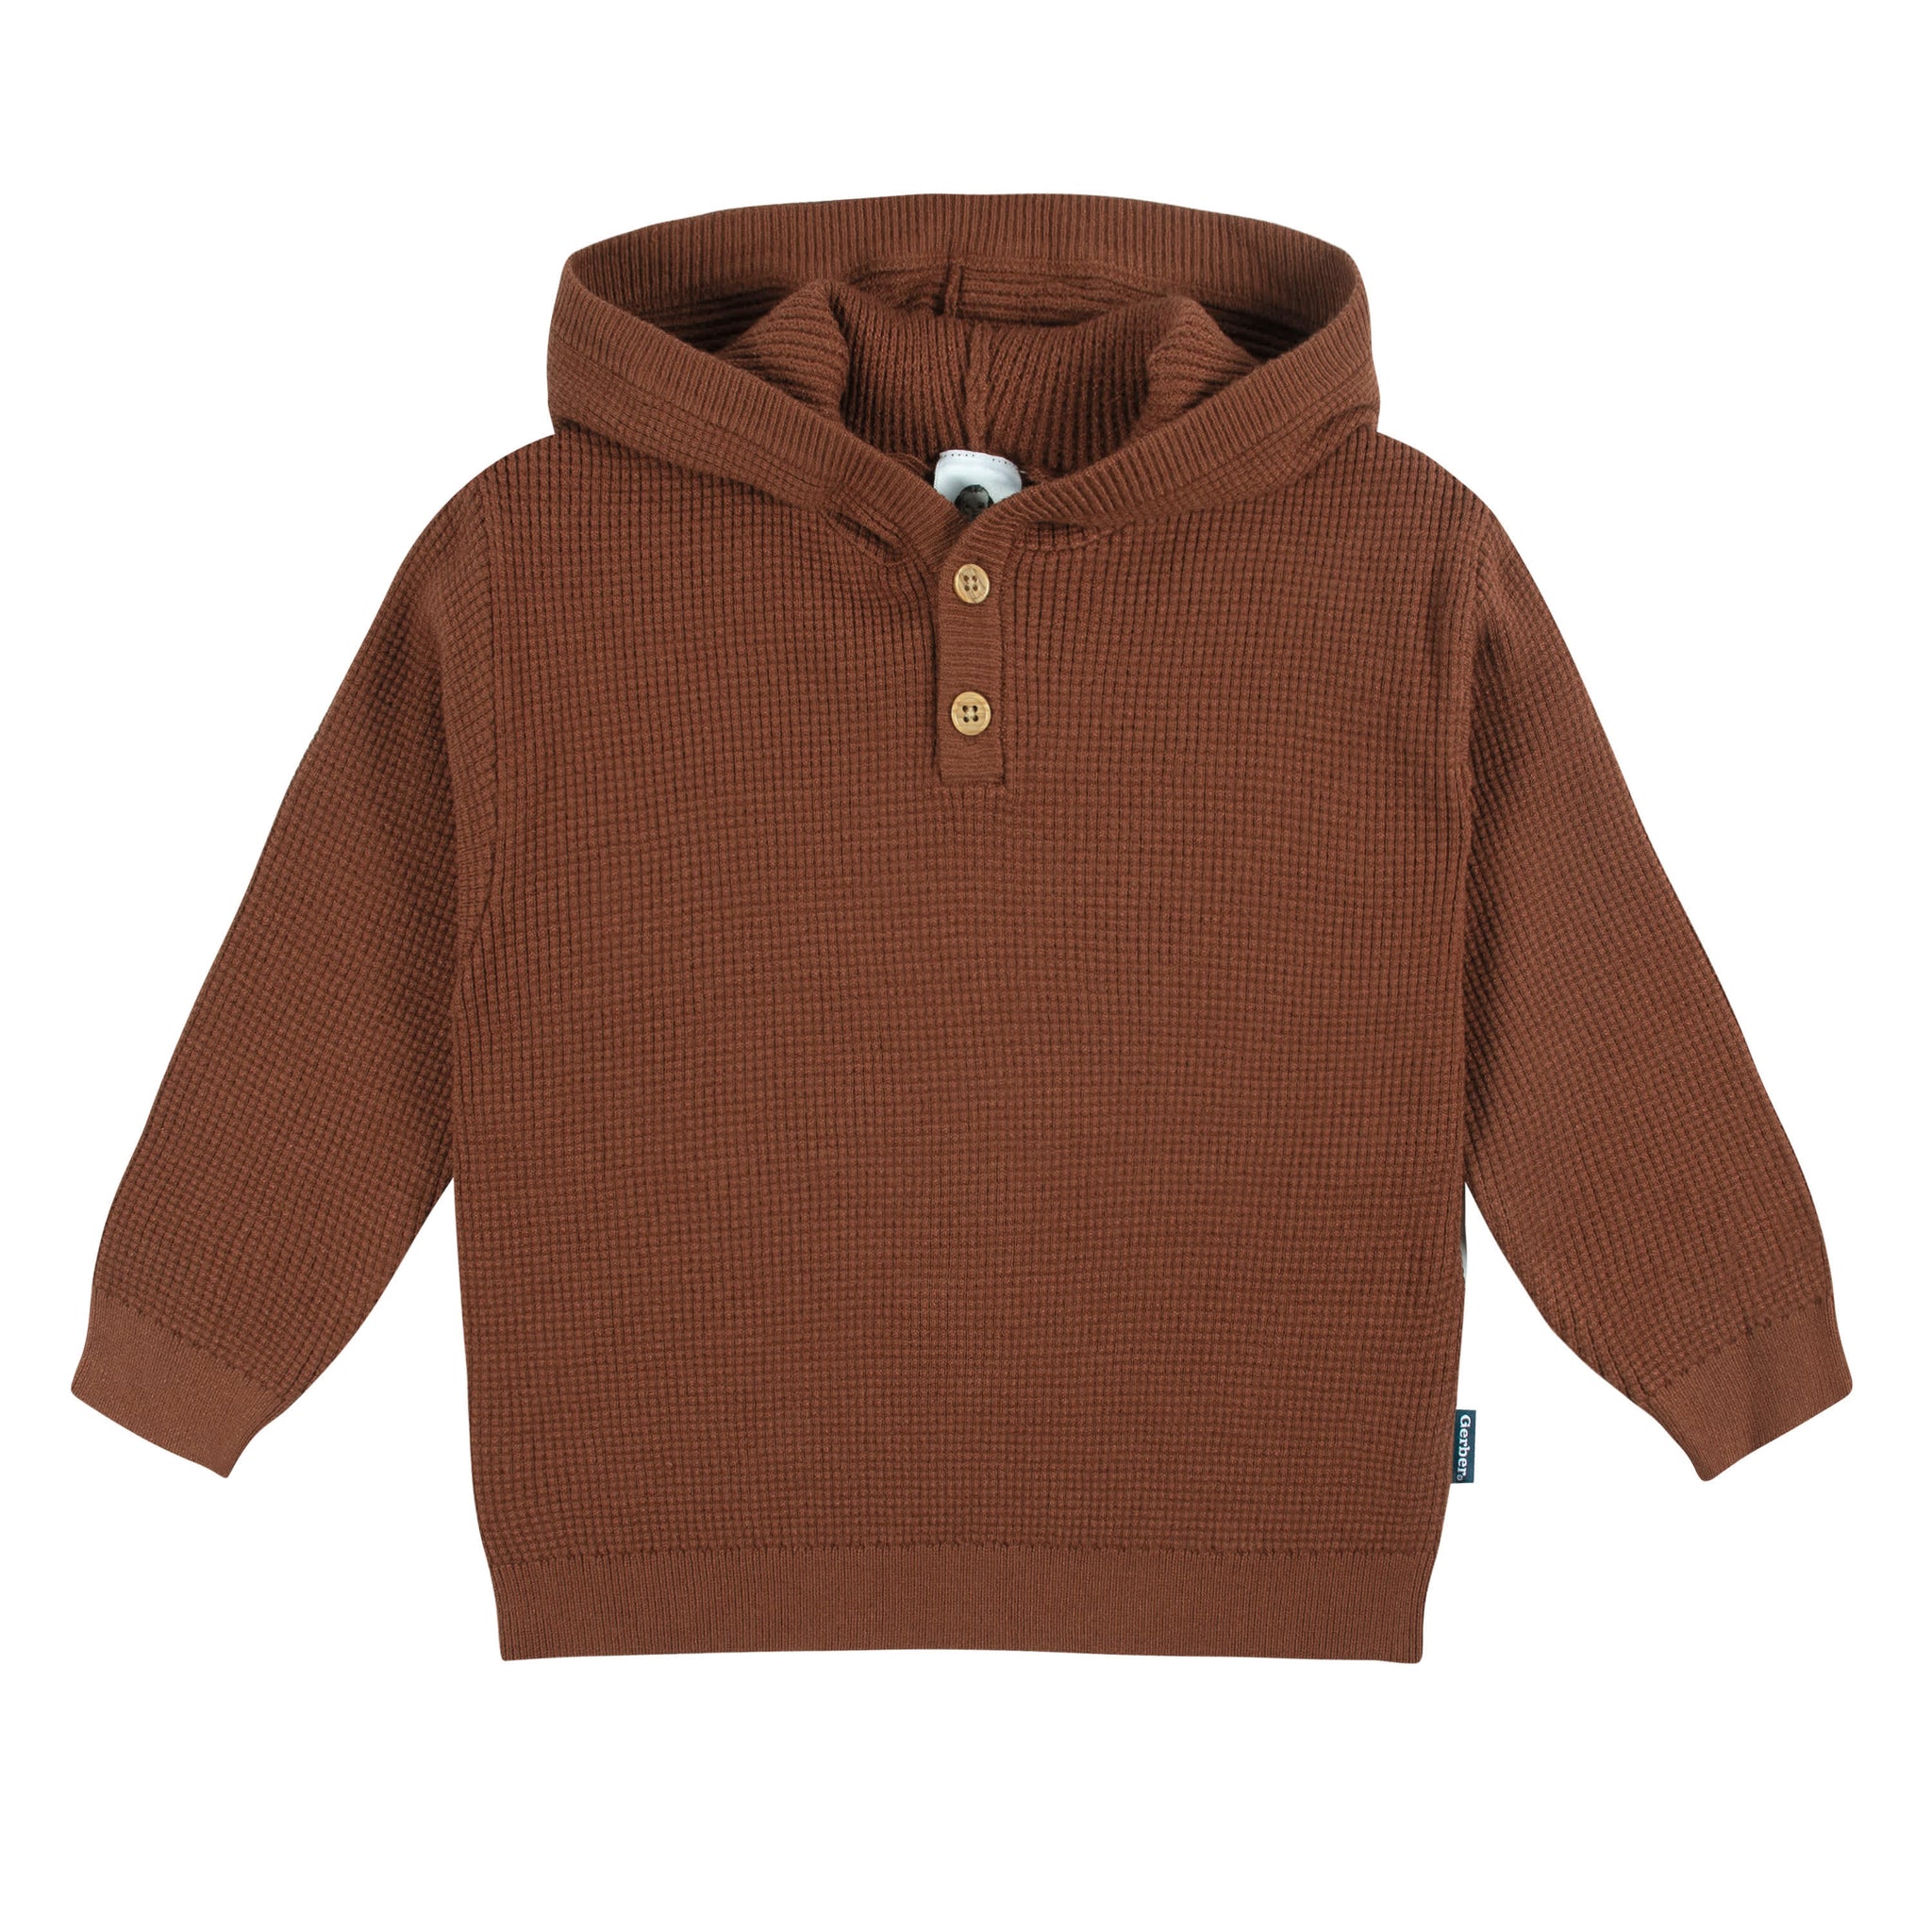 2-Piece Infant and Toddler Boys Rust Sweater Knit Set-Gerber Childrenswear Wholesale